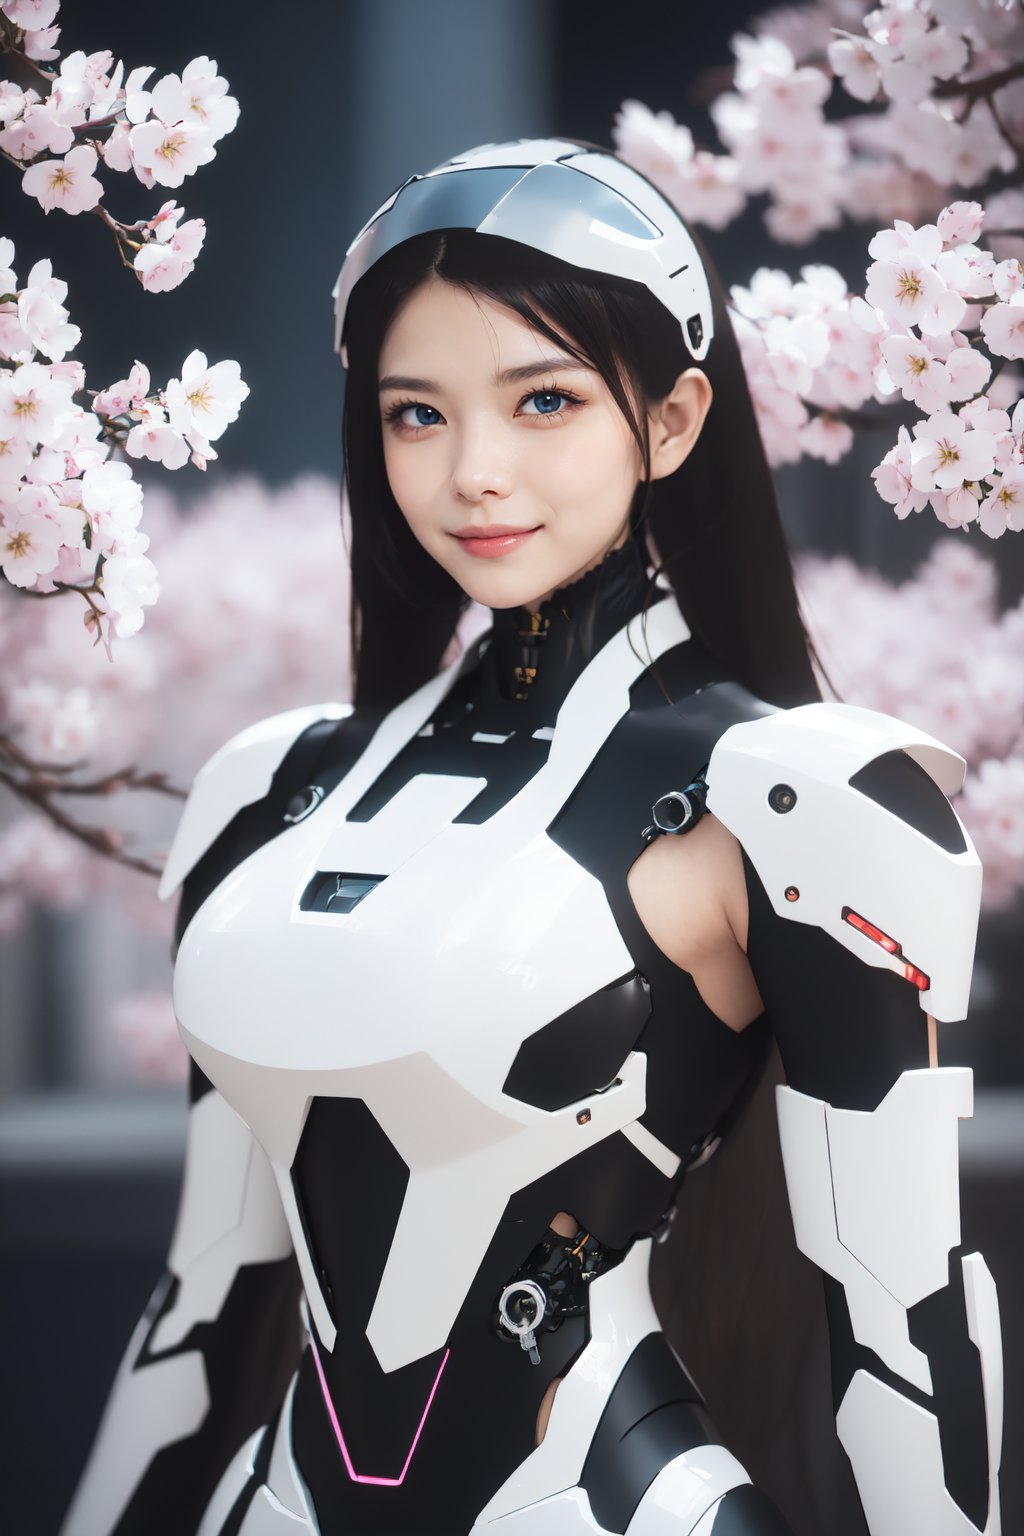 Masterpiece, High quality, 64K, Unity 64K Wallpaper, HDR, Best Quality, RAW, Super Fine Photography, Super High Resolution, Super Detailed, 
Beautiful and Aesthetic, Stunningly beautiful, Perfect proportions, 
1girl, Solo, White skin, Detailed skin, Realistic skin details, 
Futuristic Mecha, Arms Mecha, Dynamic pose, Battle stance, Swaying hair, by FuturEvoLab, 
Dark City Night, Cyberpunk City, Cyberpunk architecture, Future architecture, Fine architecture, Accurate architectural structure, Detailed complex busy background, Gorgeous, Cherry blossoms, ((Depth of field)), 
Sharp focus, Perfect facial features, Pure and pretty, Perfect eyes, Lively eyes, Elegant face, Delicate face, Exquisite face, Pink Mecha, ,Mecha,Cyberpunk